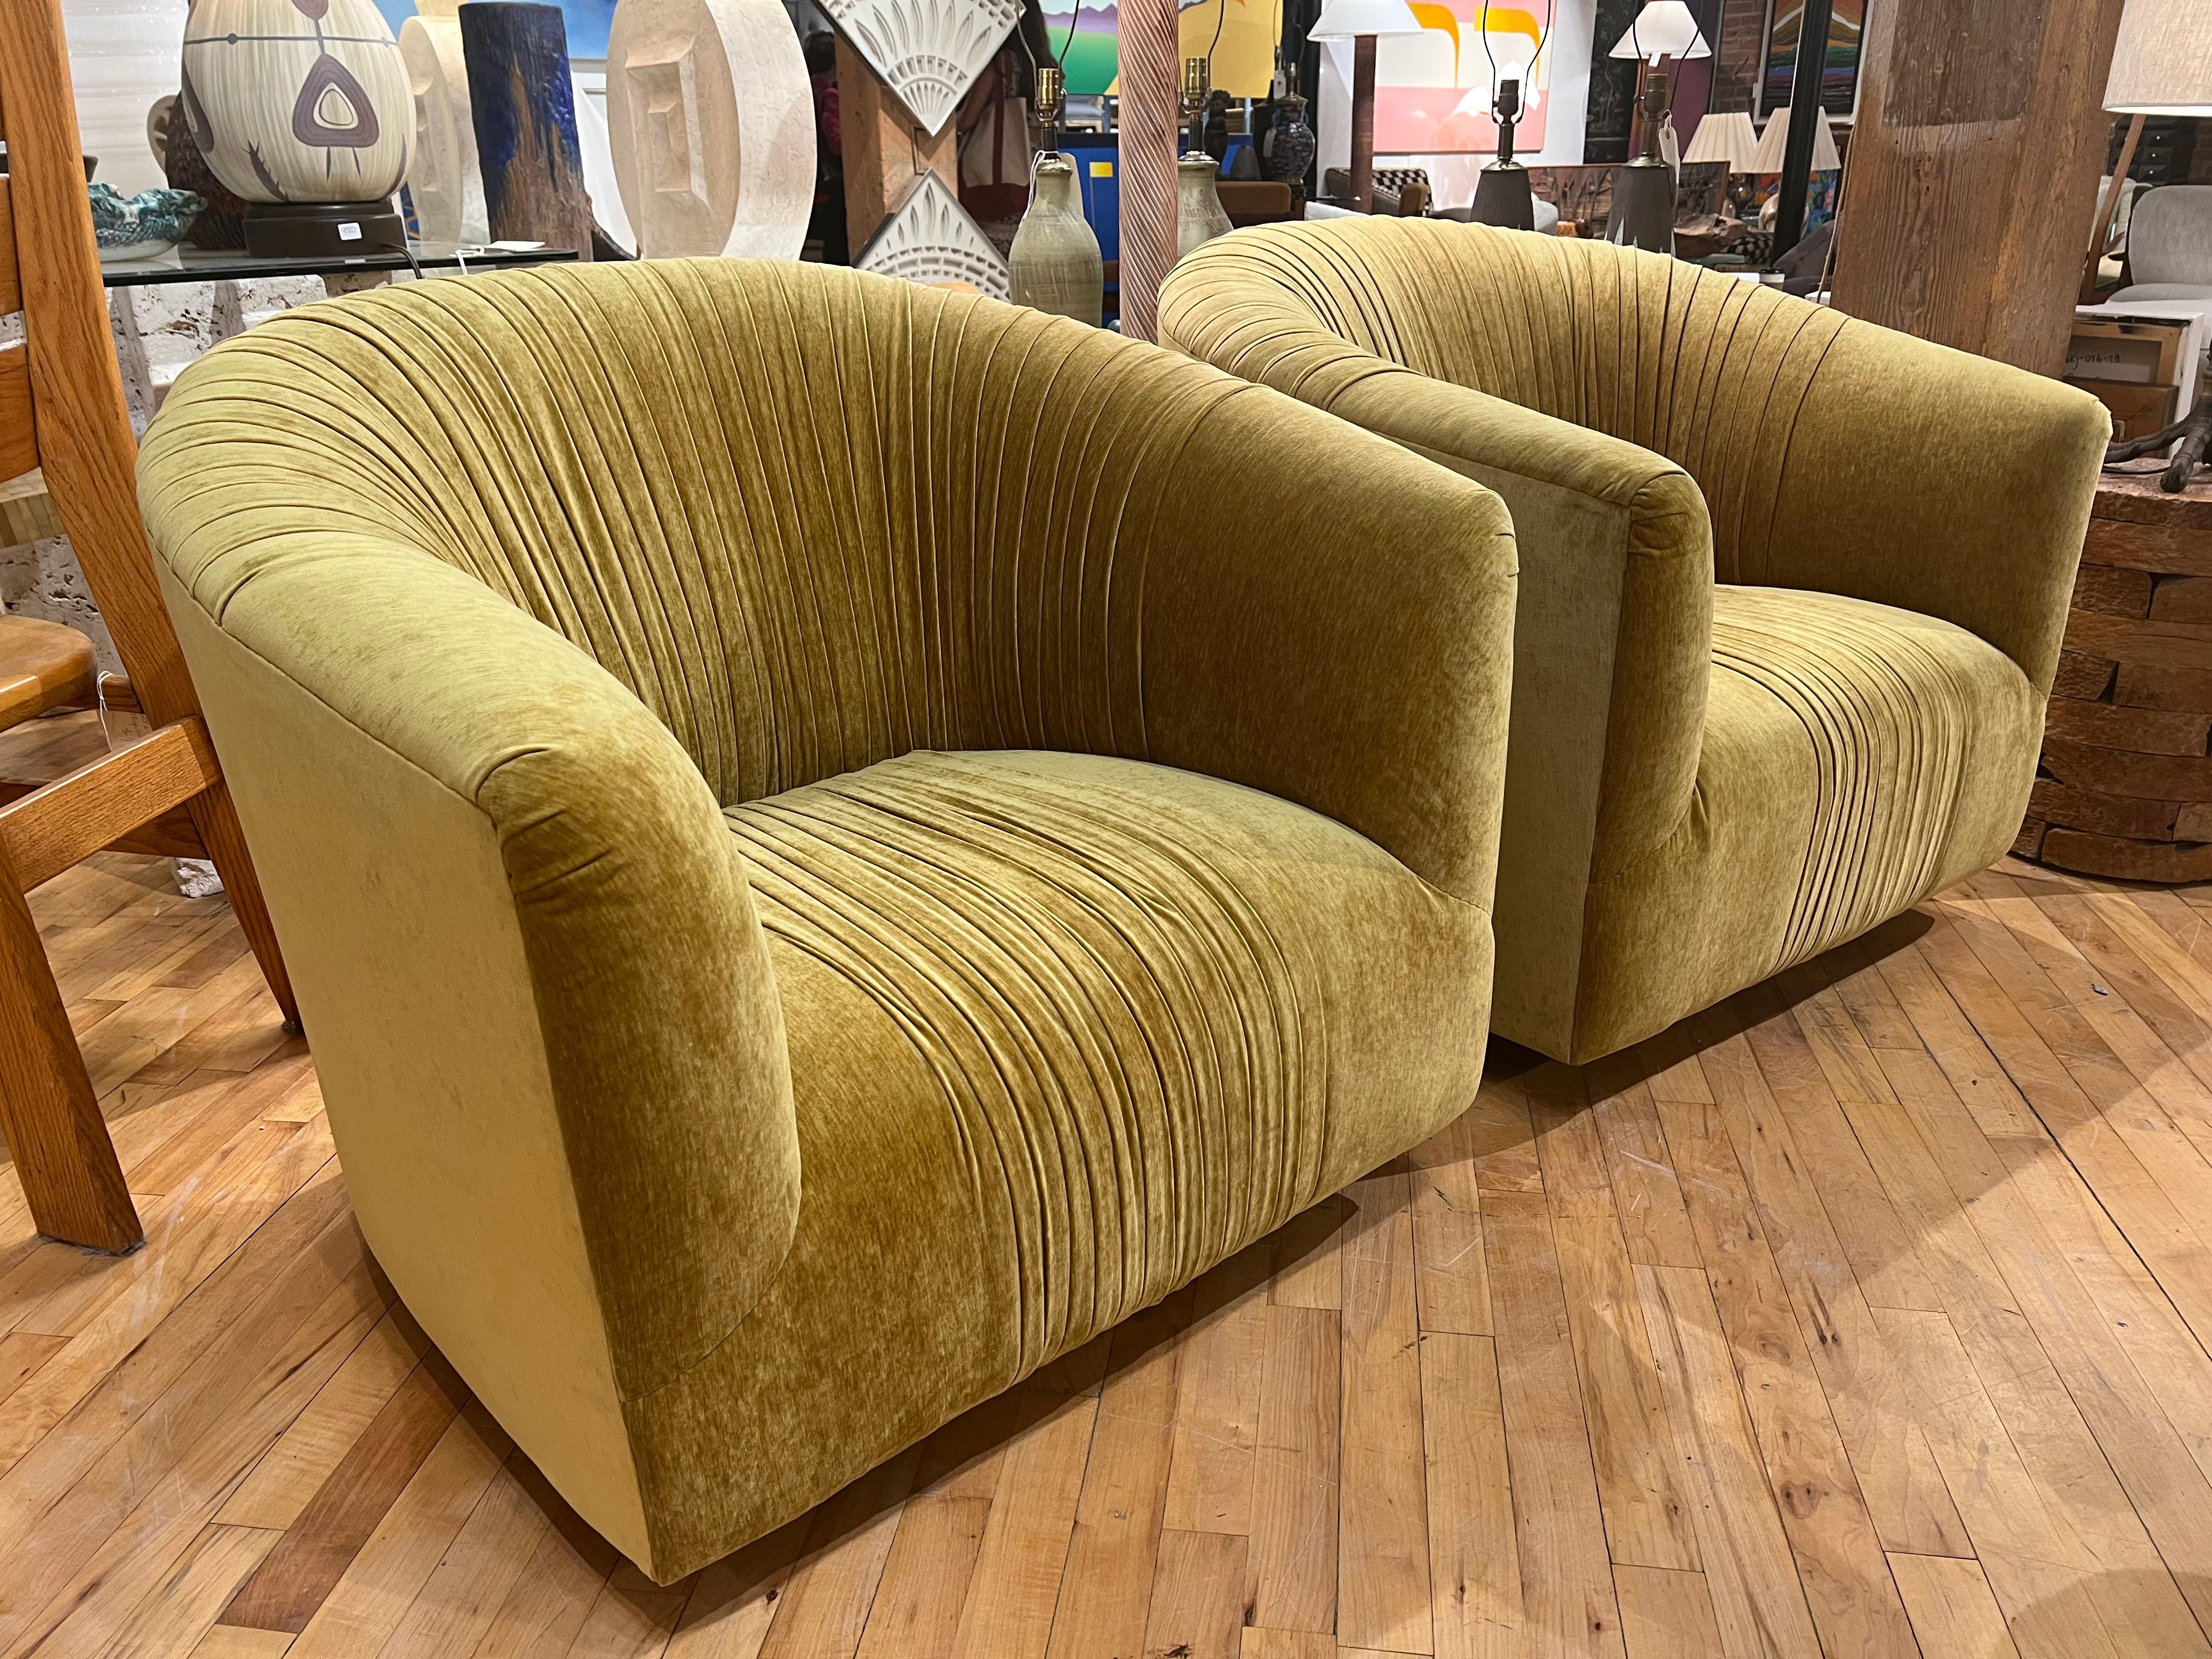 Mid-century swivel lounge chairs redone in chenille. Custom upholstery.